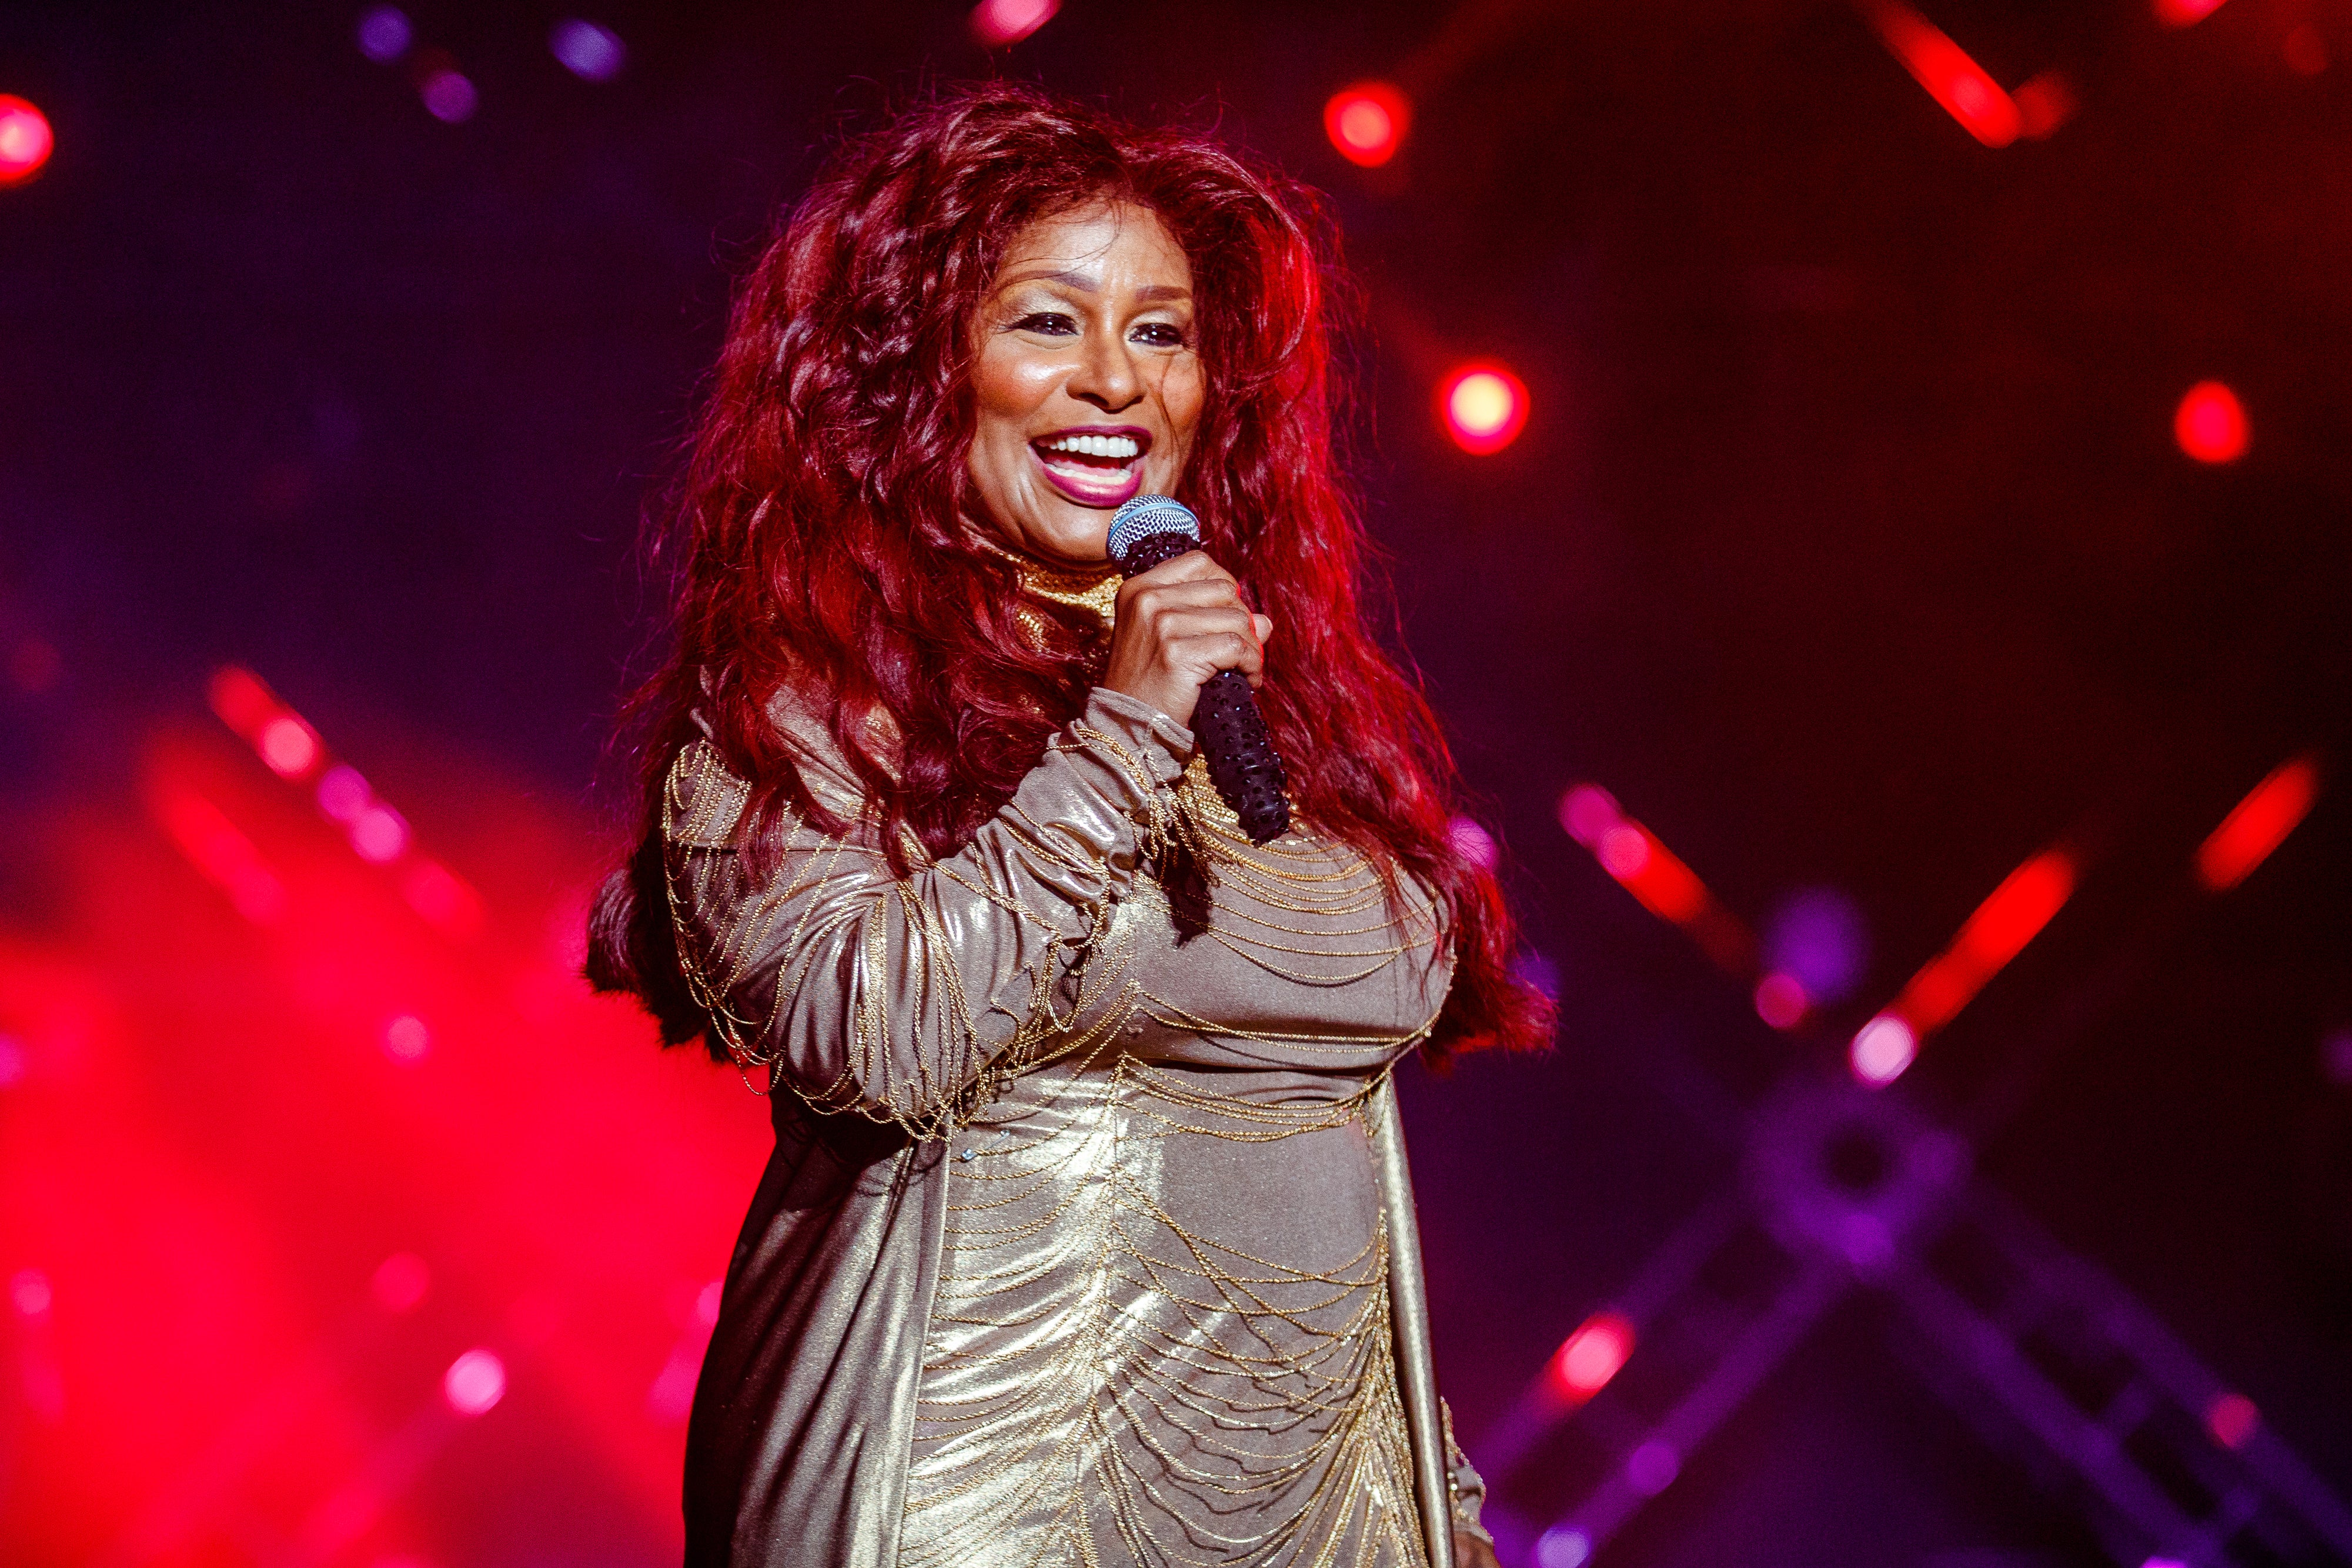 Even Chaka Khan Thinks Aretha Franklin Is The Queen
